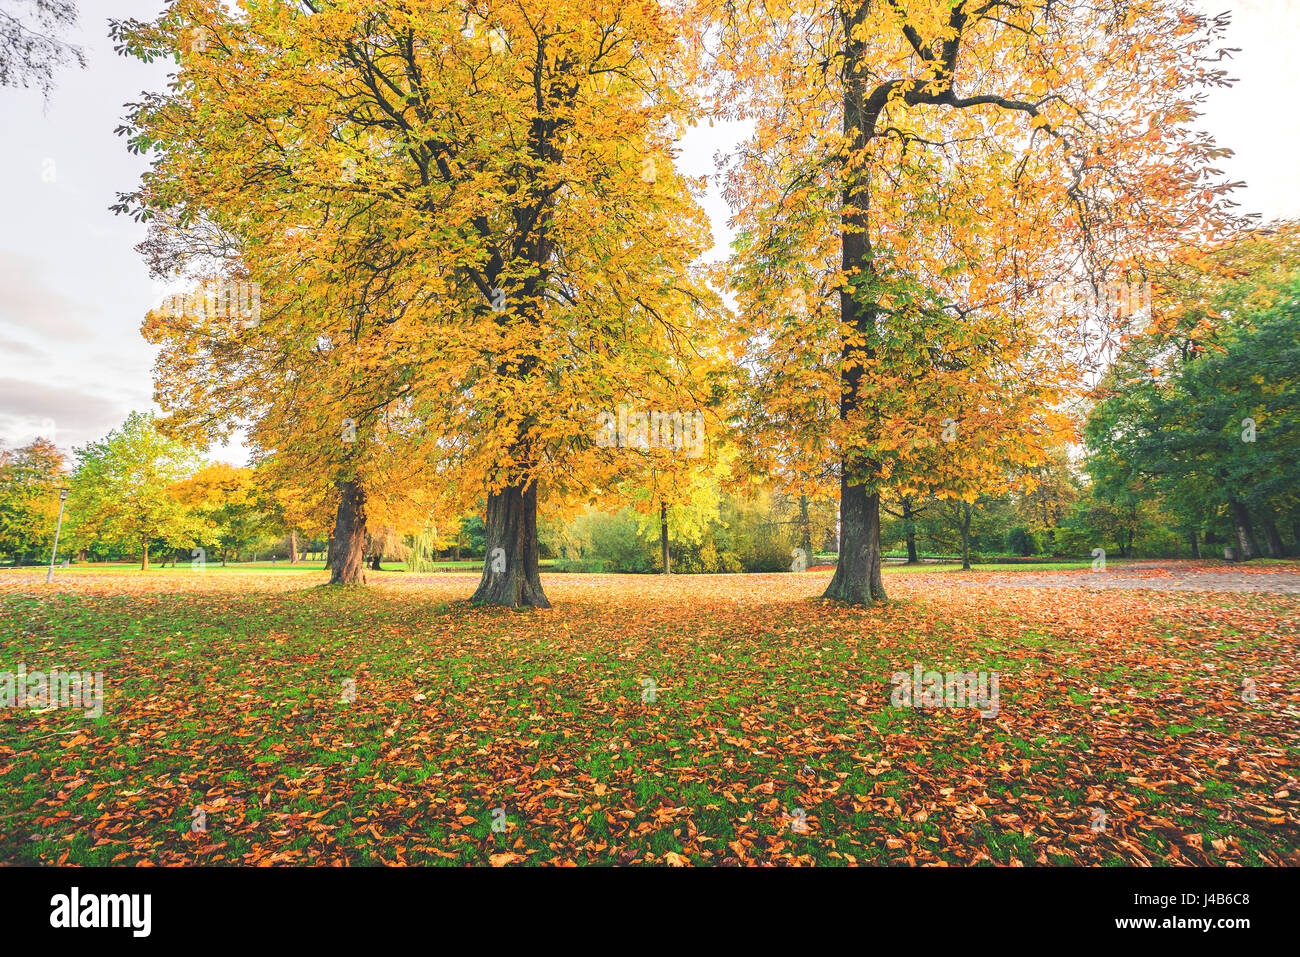 Yellow autumn leaves on colorful autumn trees in a park in the fall with autumn leaves covering the ground in october Stock Photo